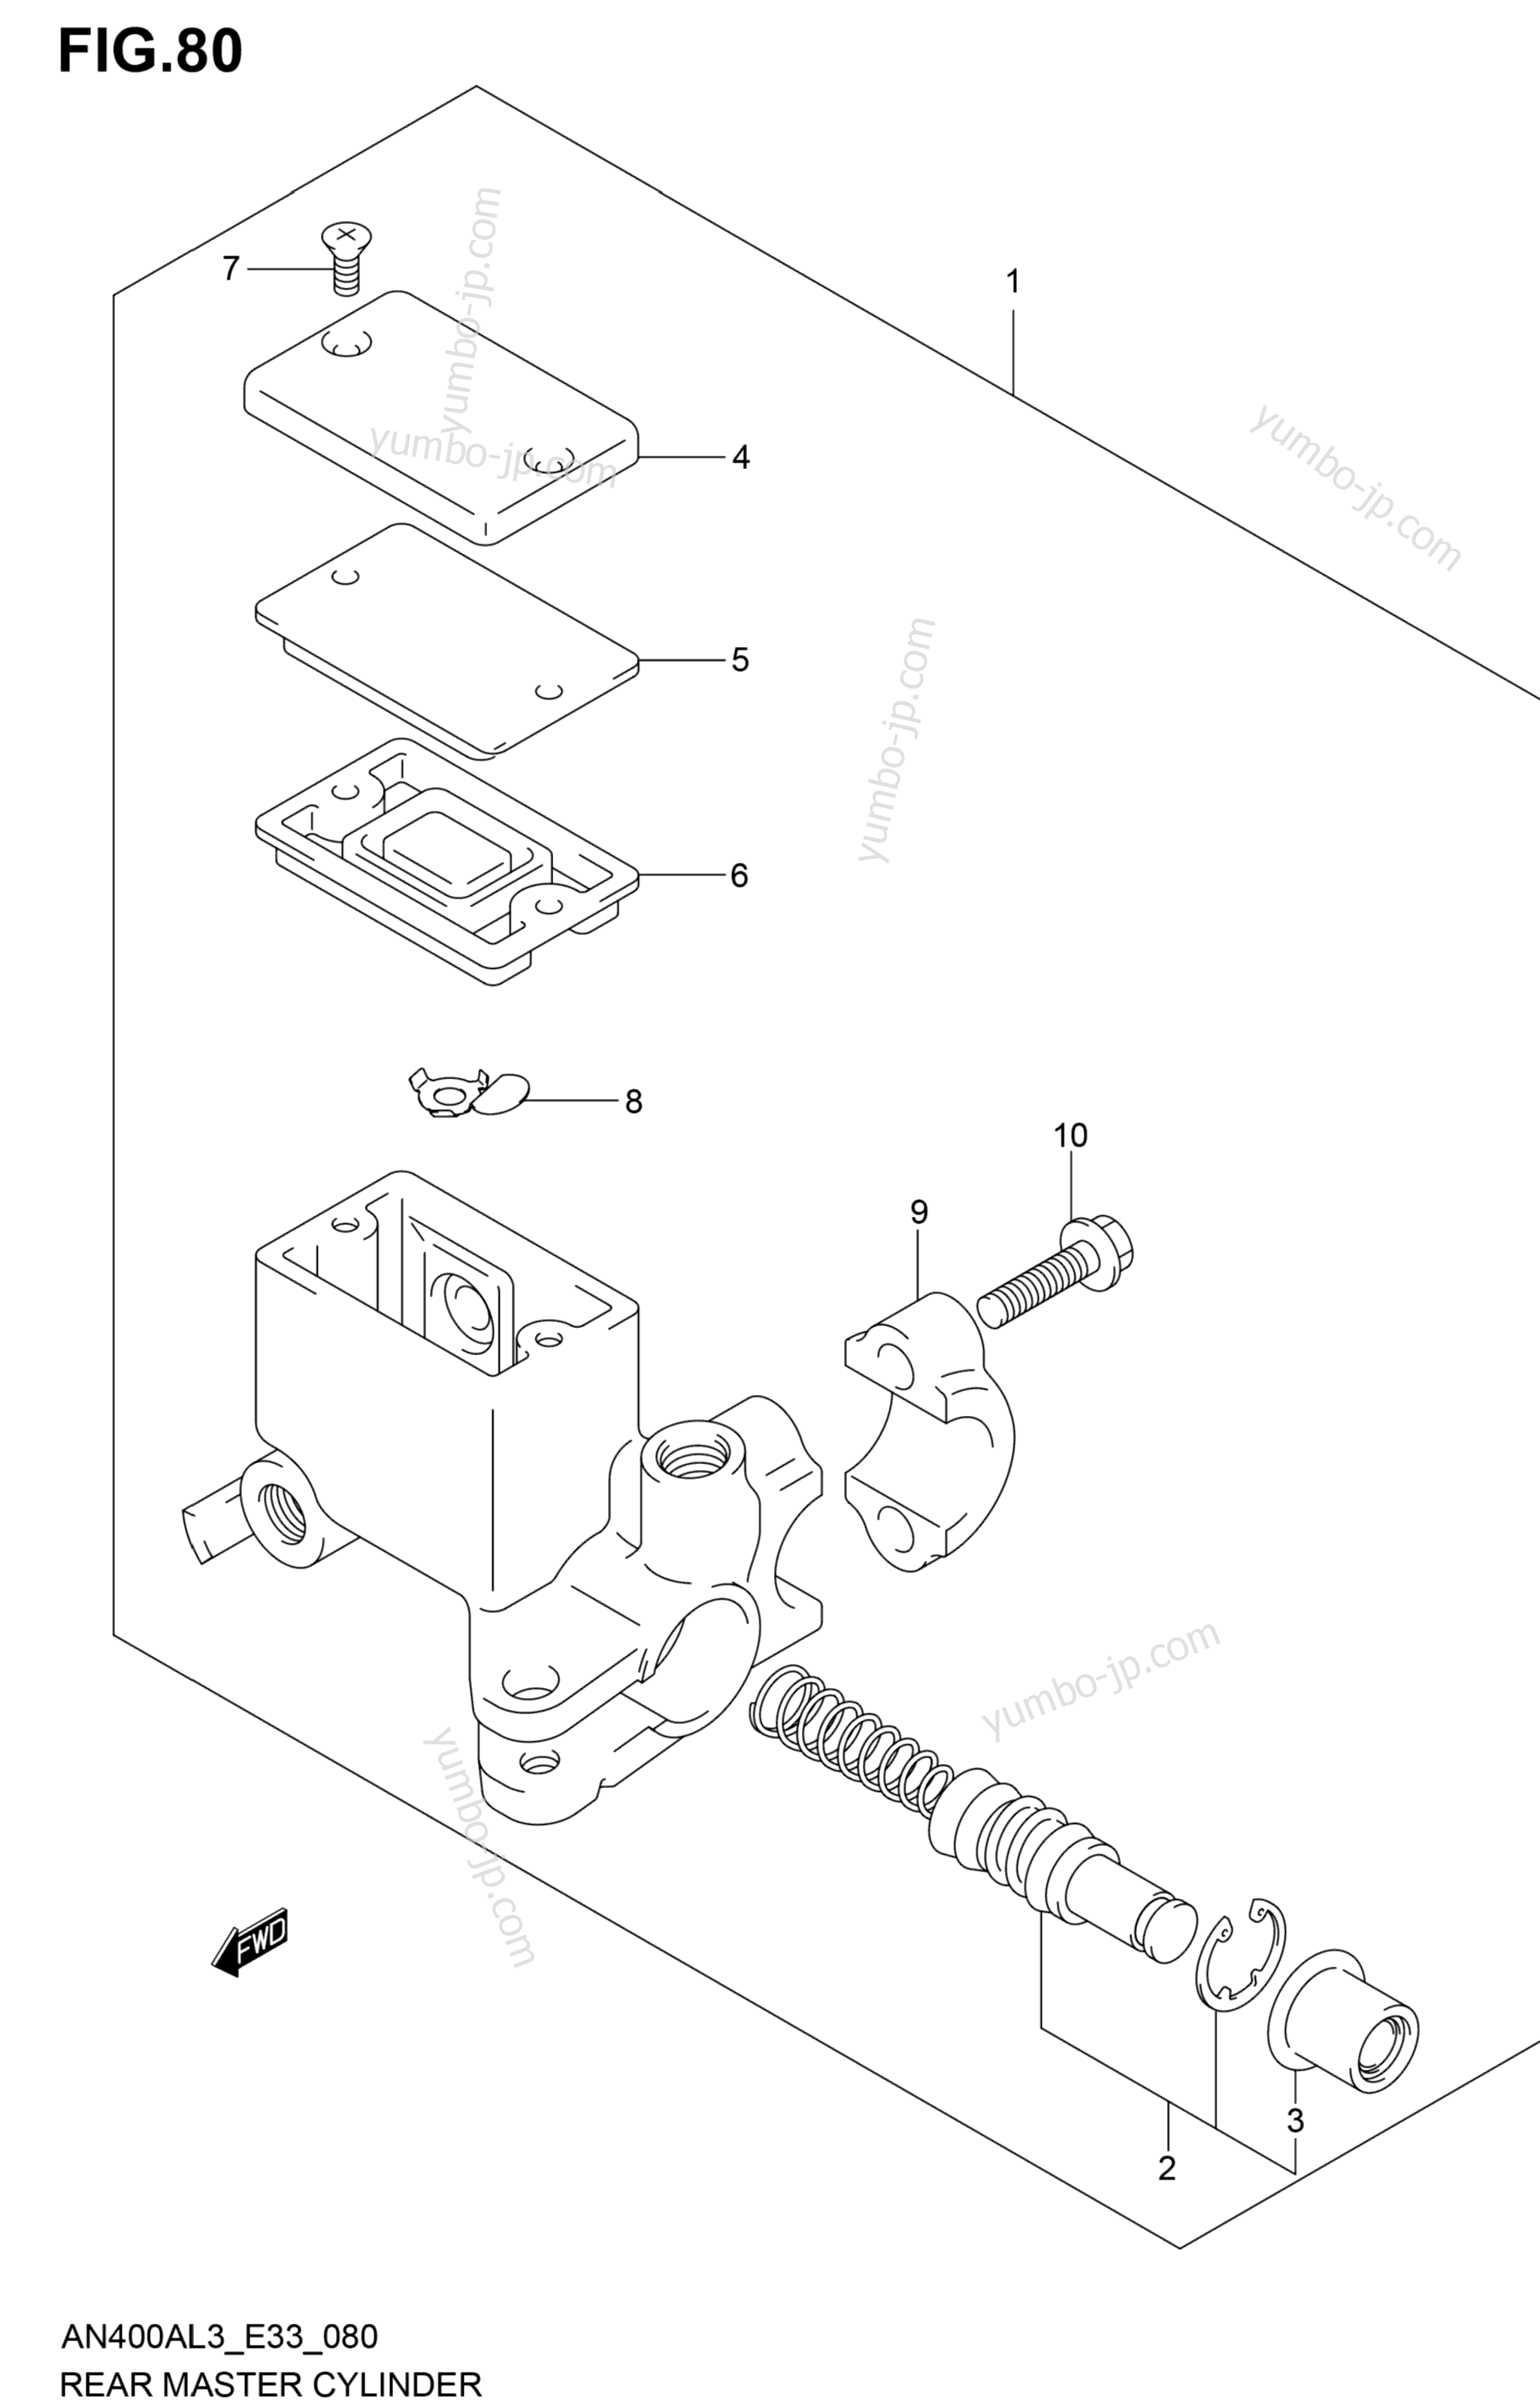 REAR MASTER CYLINDER for scooters SUZUKI AN400A 2013 year